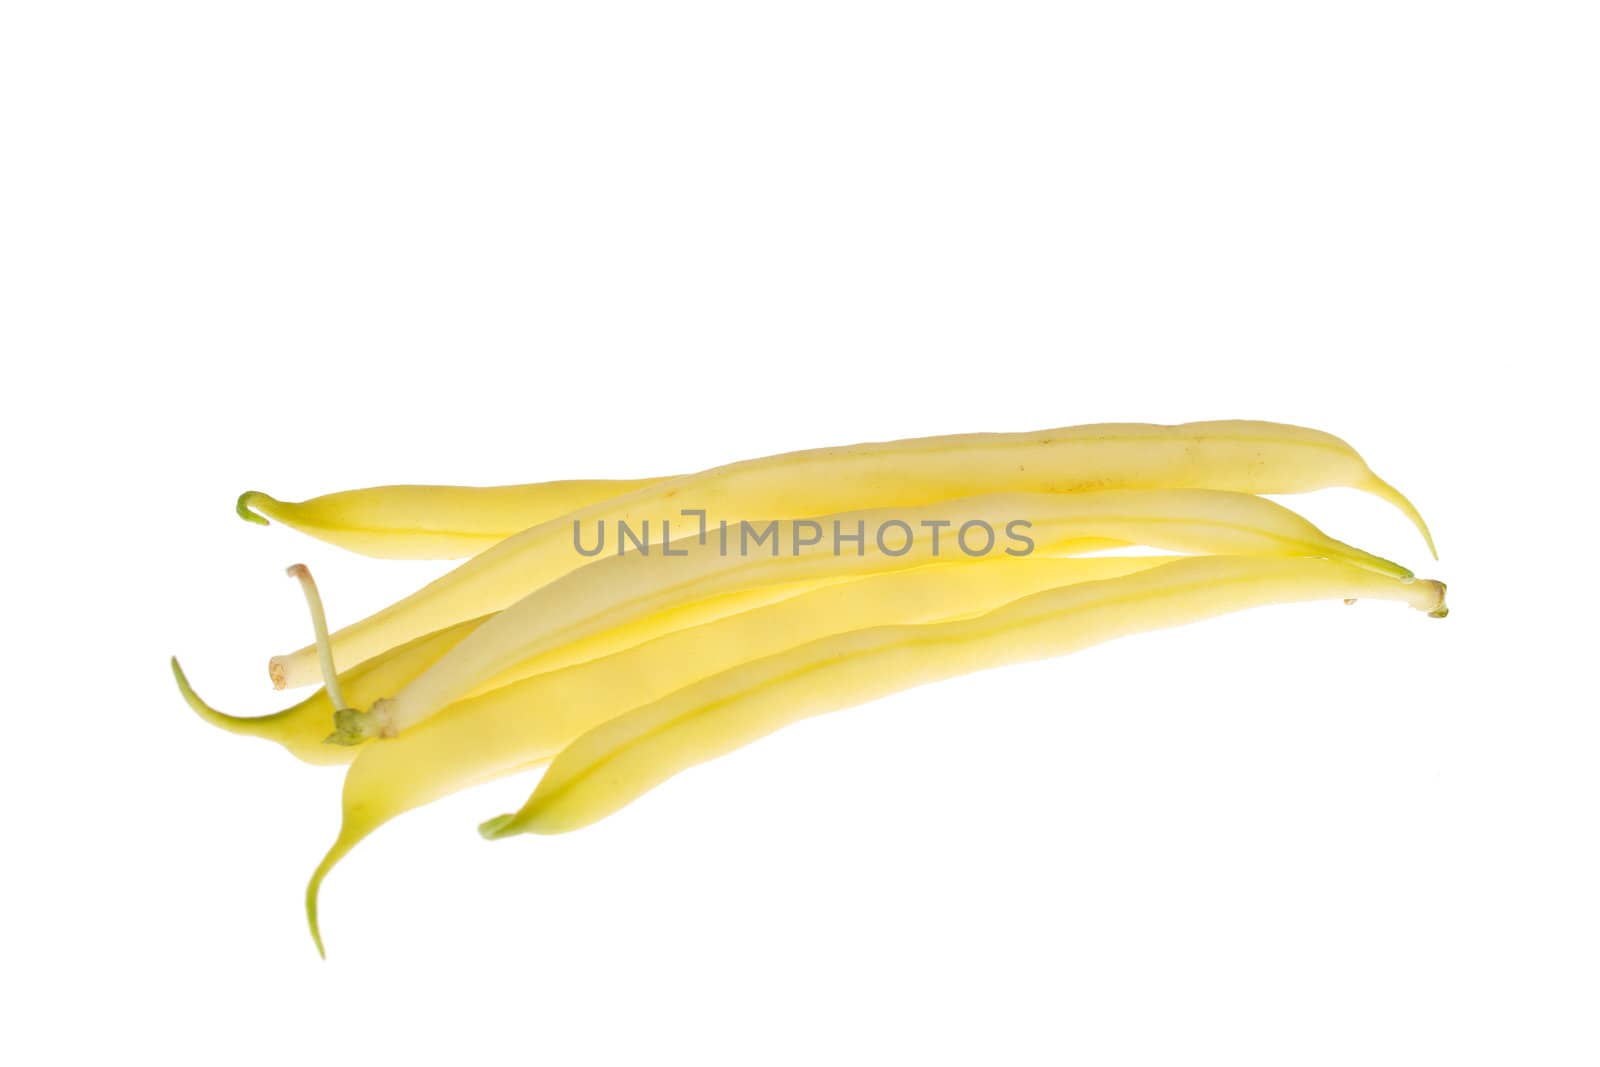 yellow string beans isolated on the white background